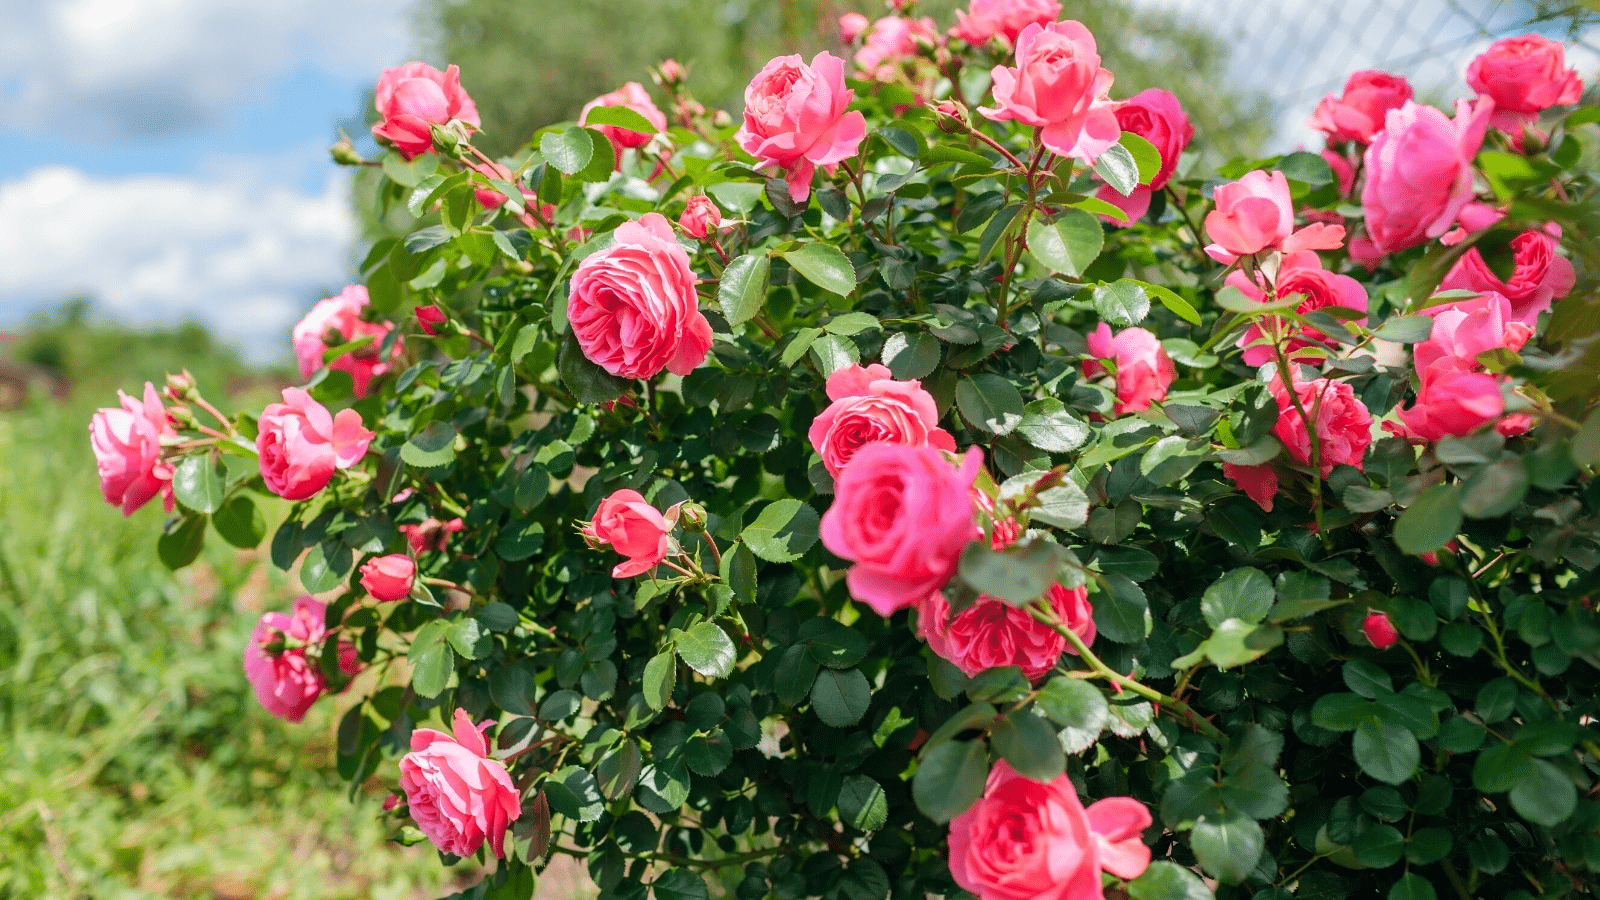 A rose bush with healthy growth due to adding coffee grounds to the soil